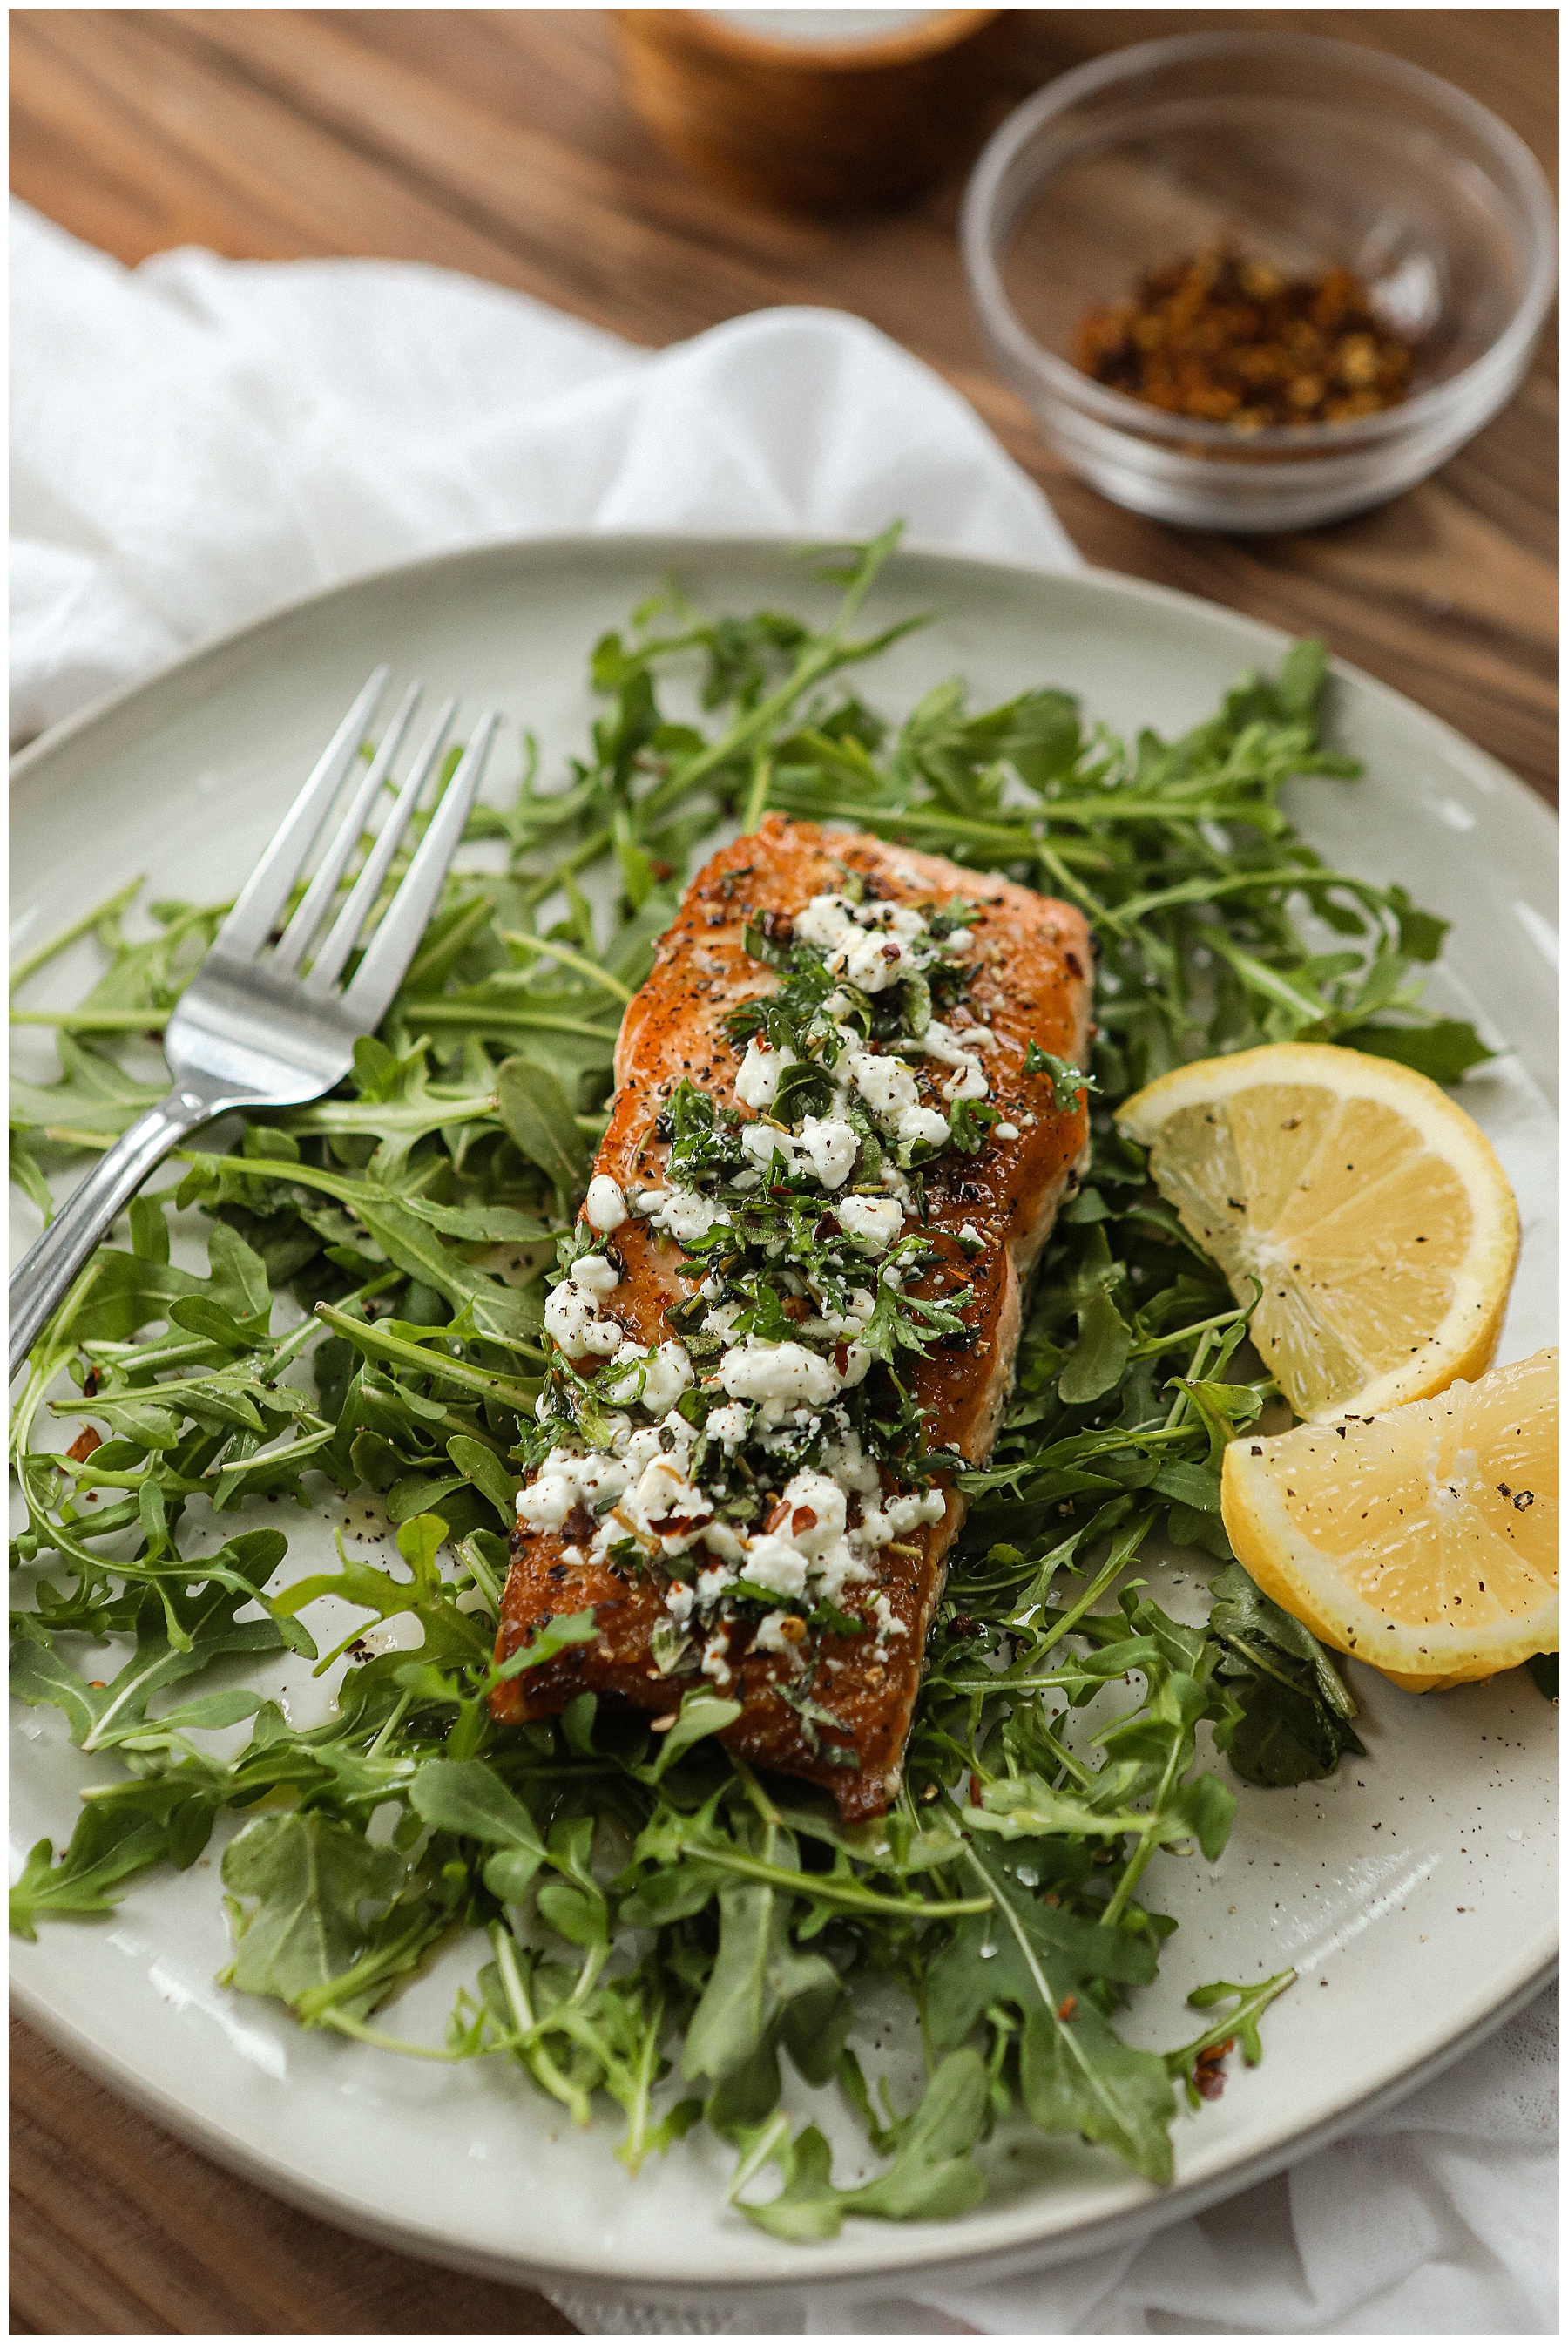 Salmon with Goat Cheese & Herbs